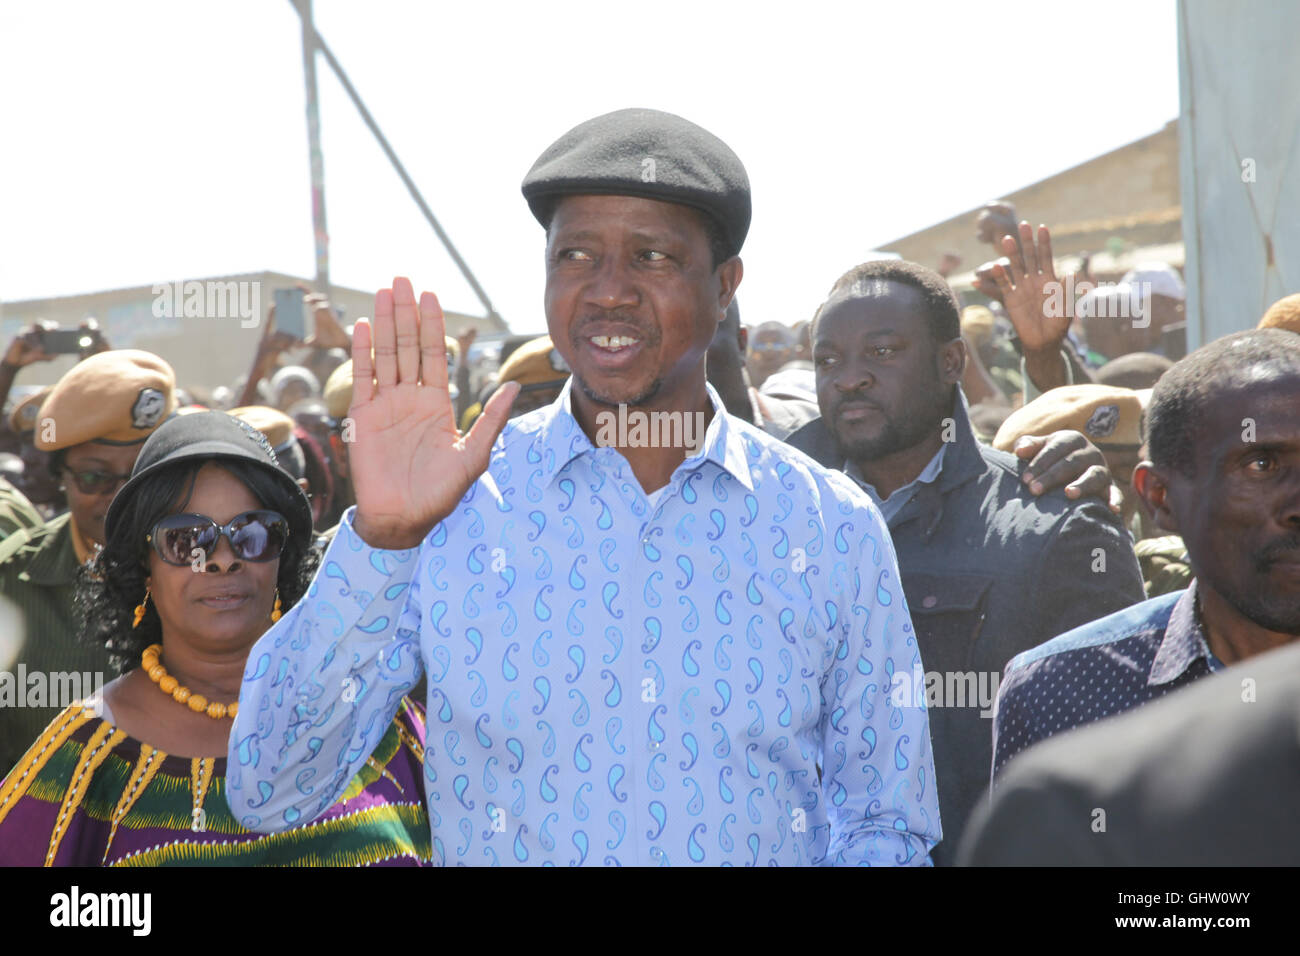 Lusaka, Zambia. 11th Aug, 2016. Zambian incumbent President, the presidential candidate of the ruling Patriotic Front (PF) Edgar Lungu arrives at a polling station to cast his vote in Lusaka, Zambia, Aug. 11, 2016. Polling started Thursday morning for Zambia's general elections and referendum. About 6.7 million registered voters are expected to cast their ballots at nearly 7,700 polling stations across the country, which opened from 6 a.m to 6 p.m. Credit:  Peng Lijun/Xinhua/Alamy Live News Stock Photo